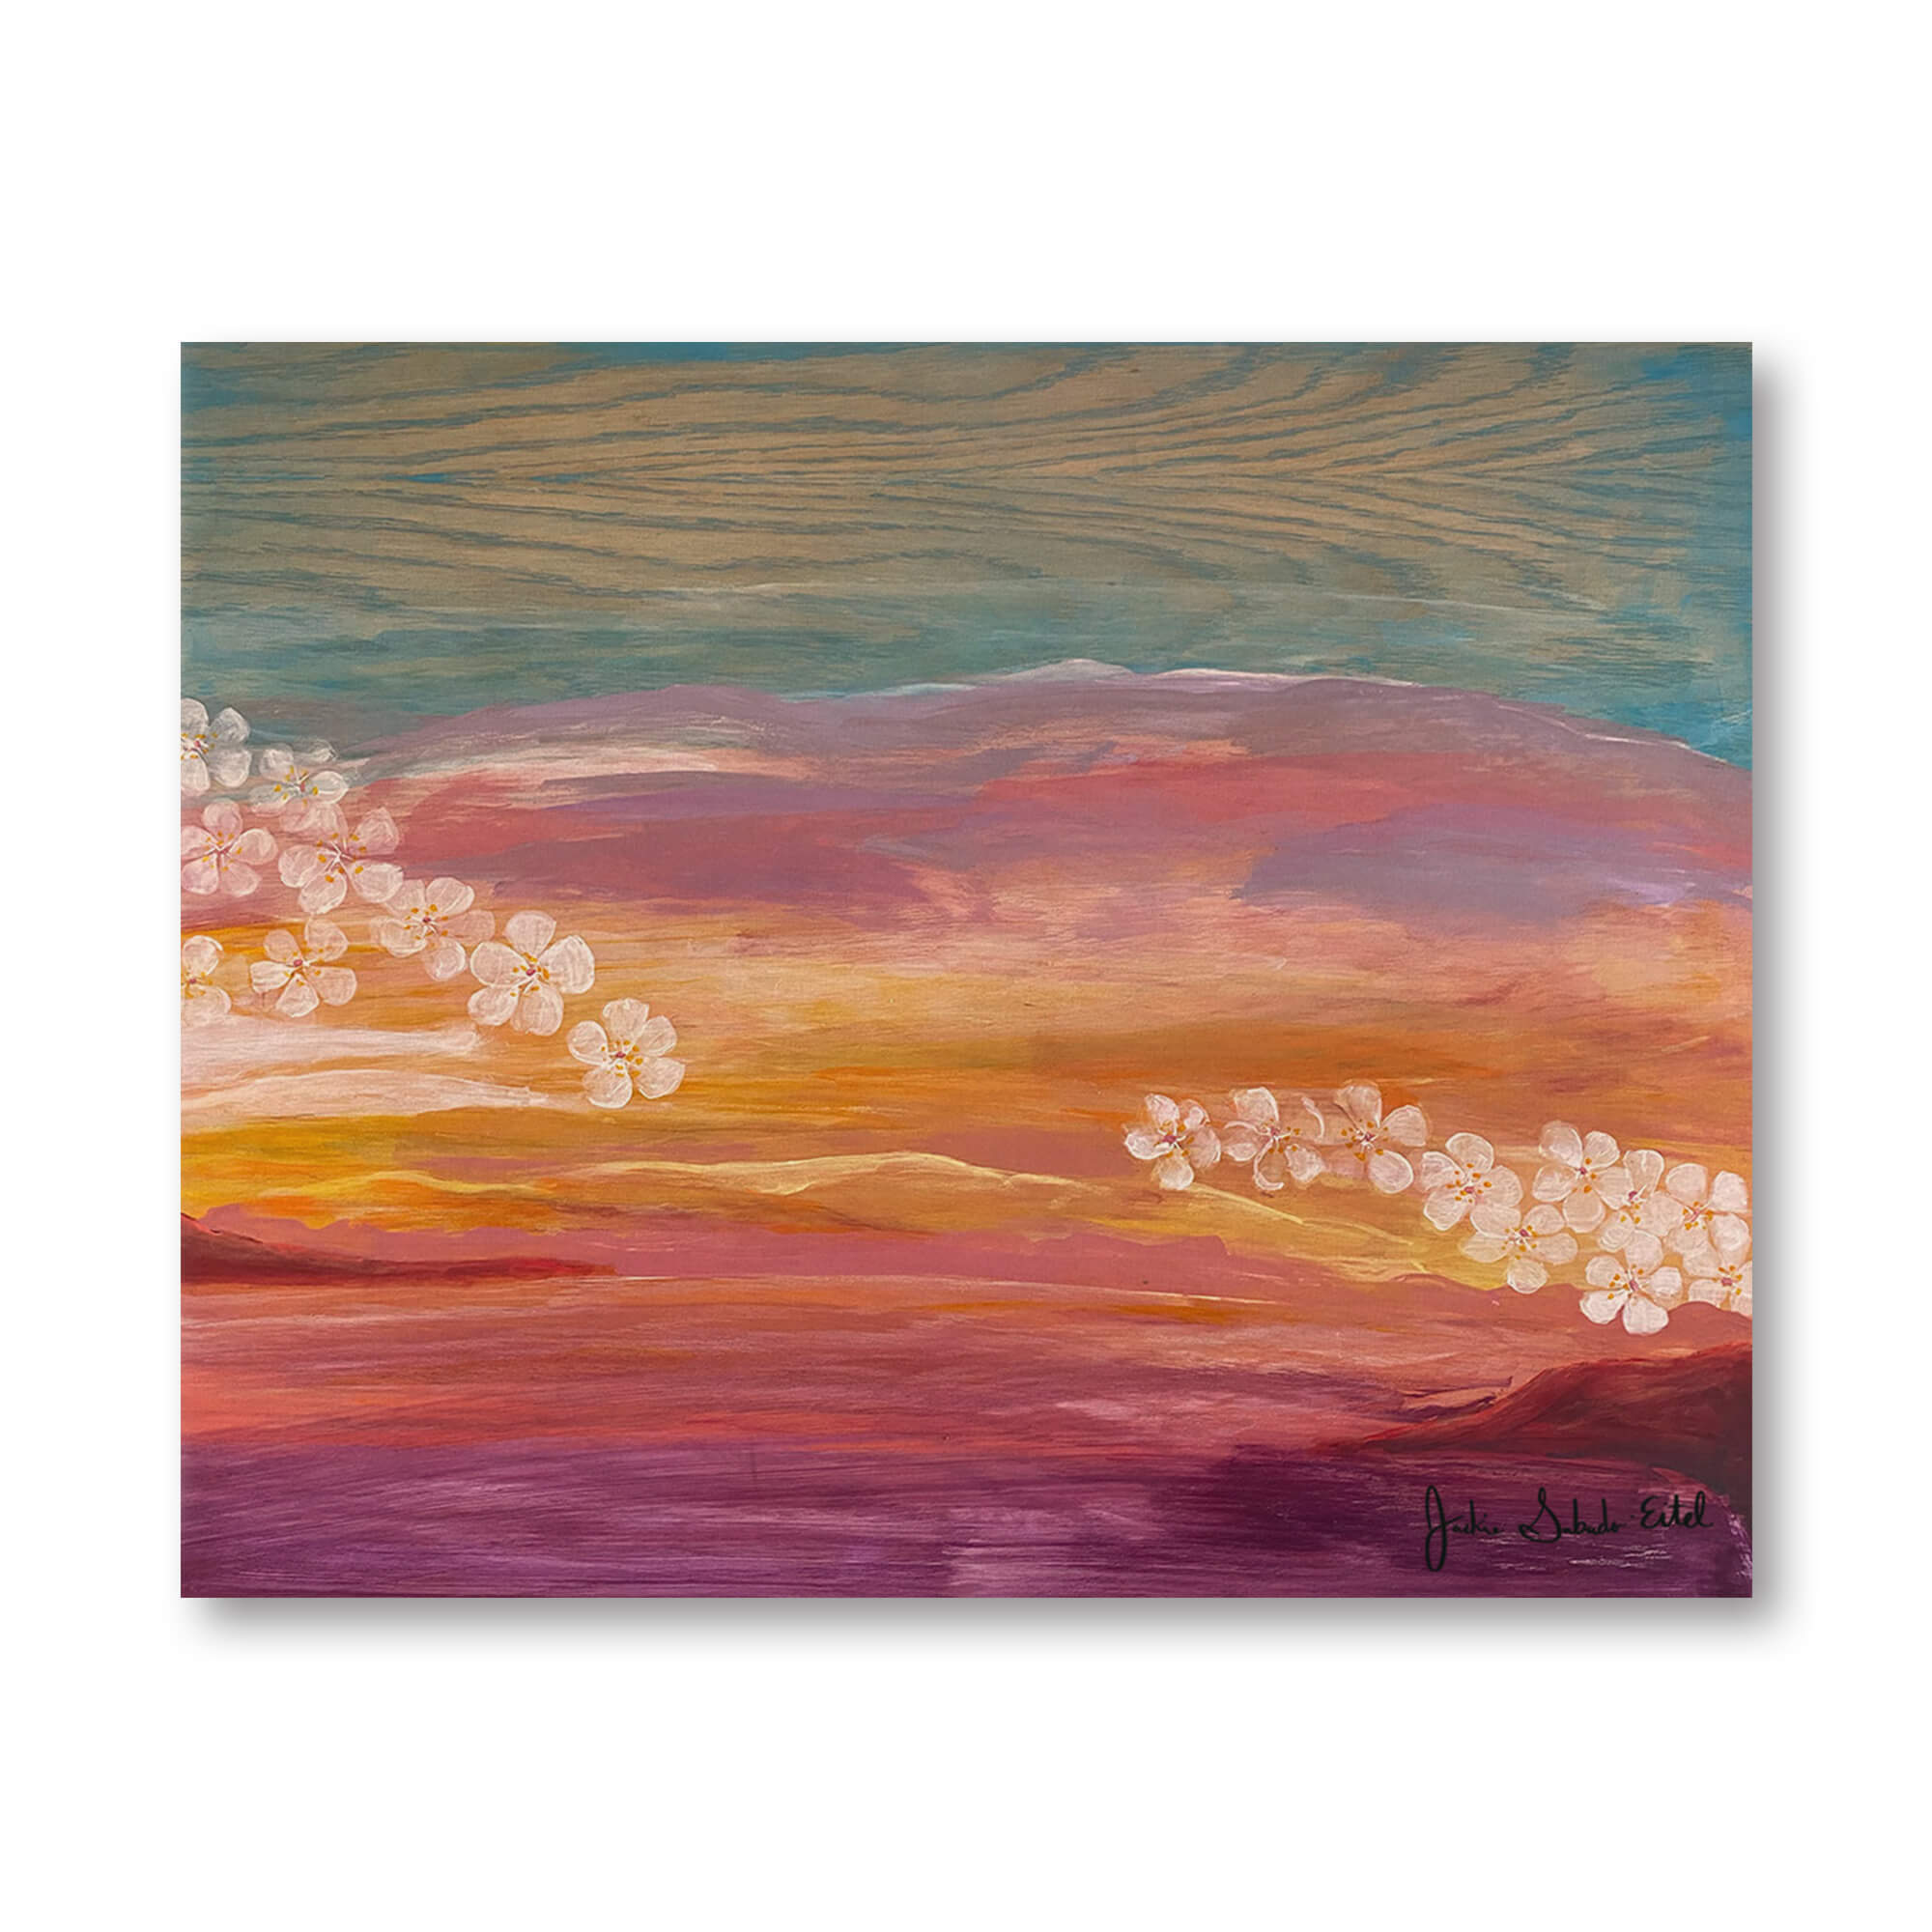 A wood print  of vibrant colorful sunset and plumeria flowers by Hawaii artist Jackie Eitel